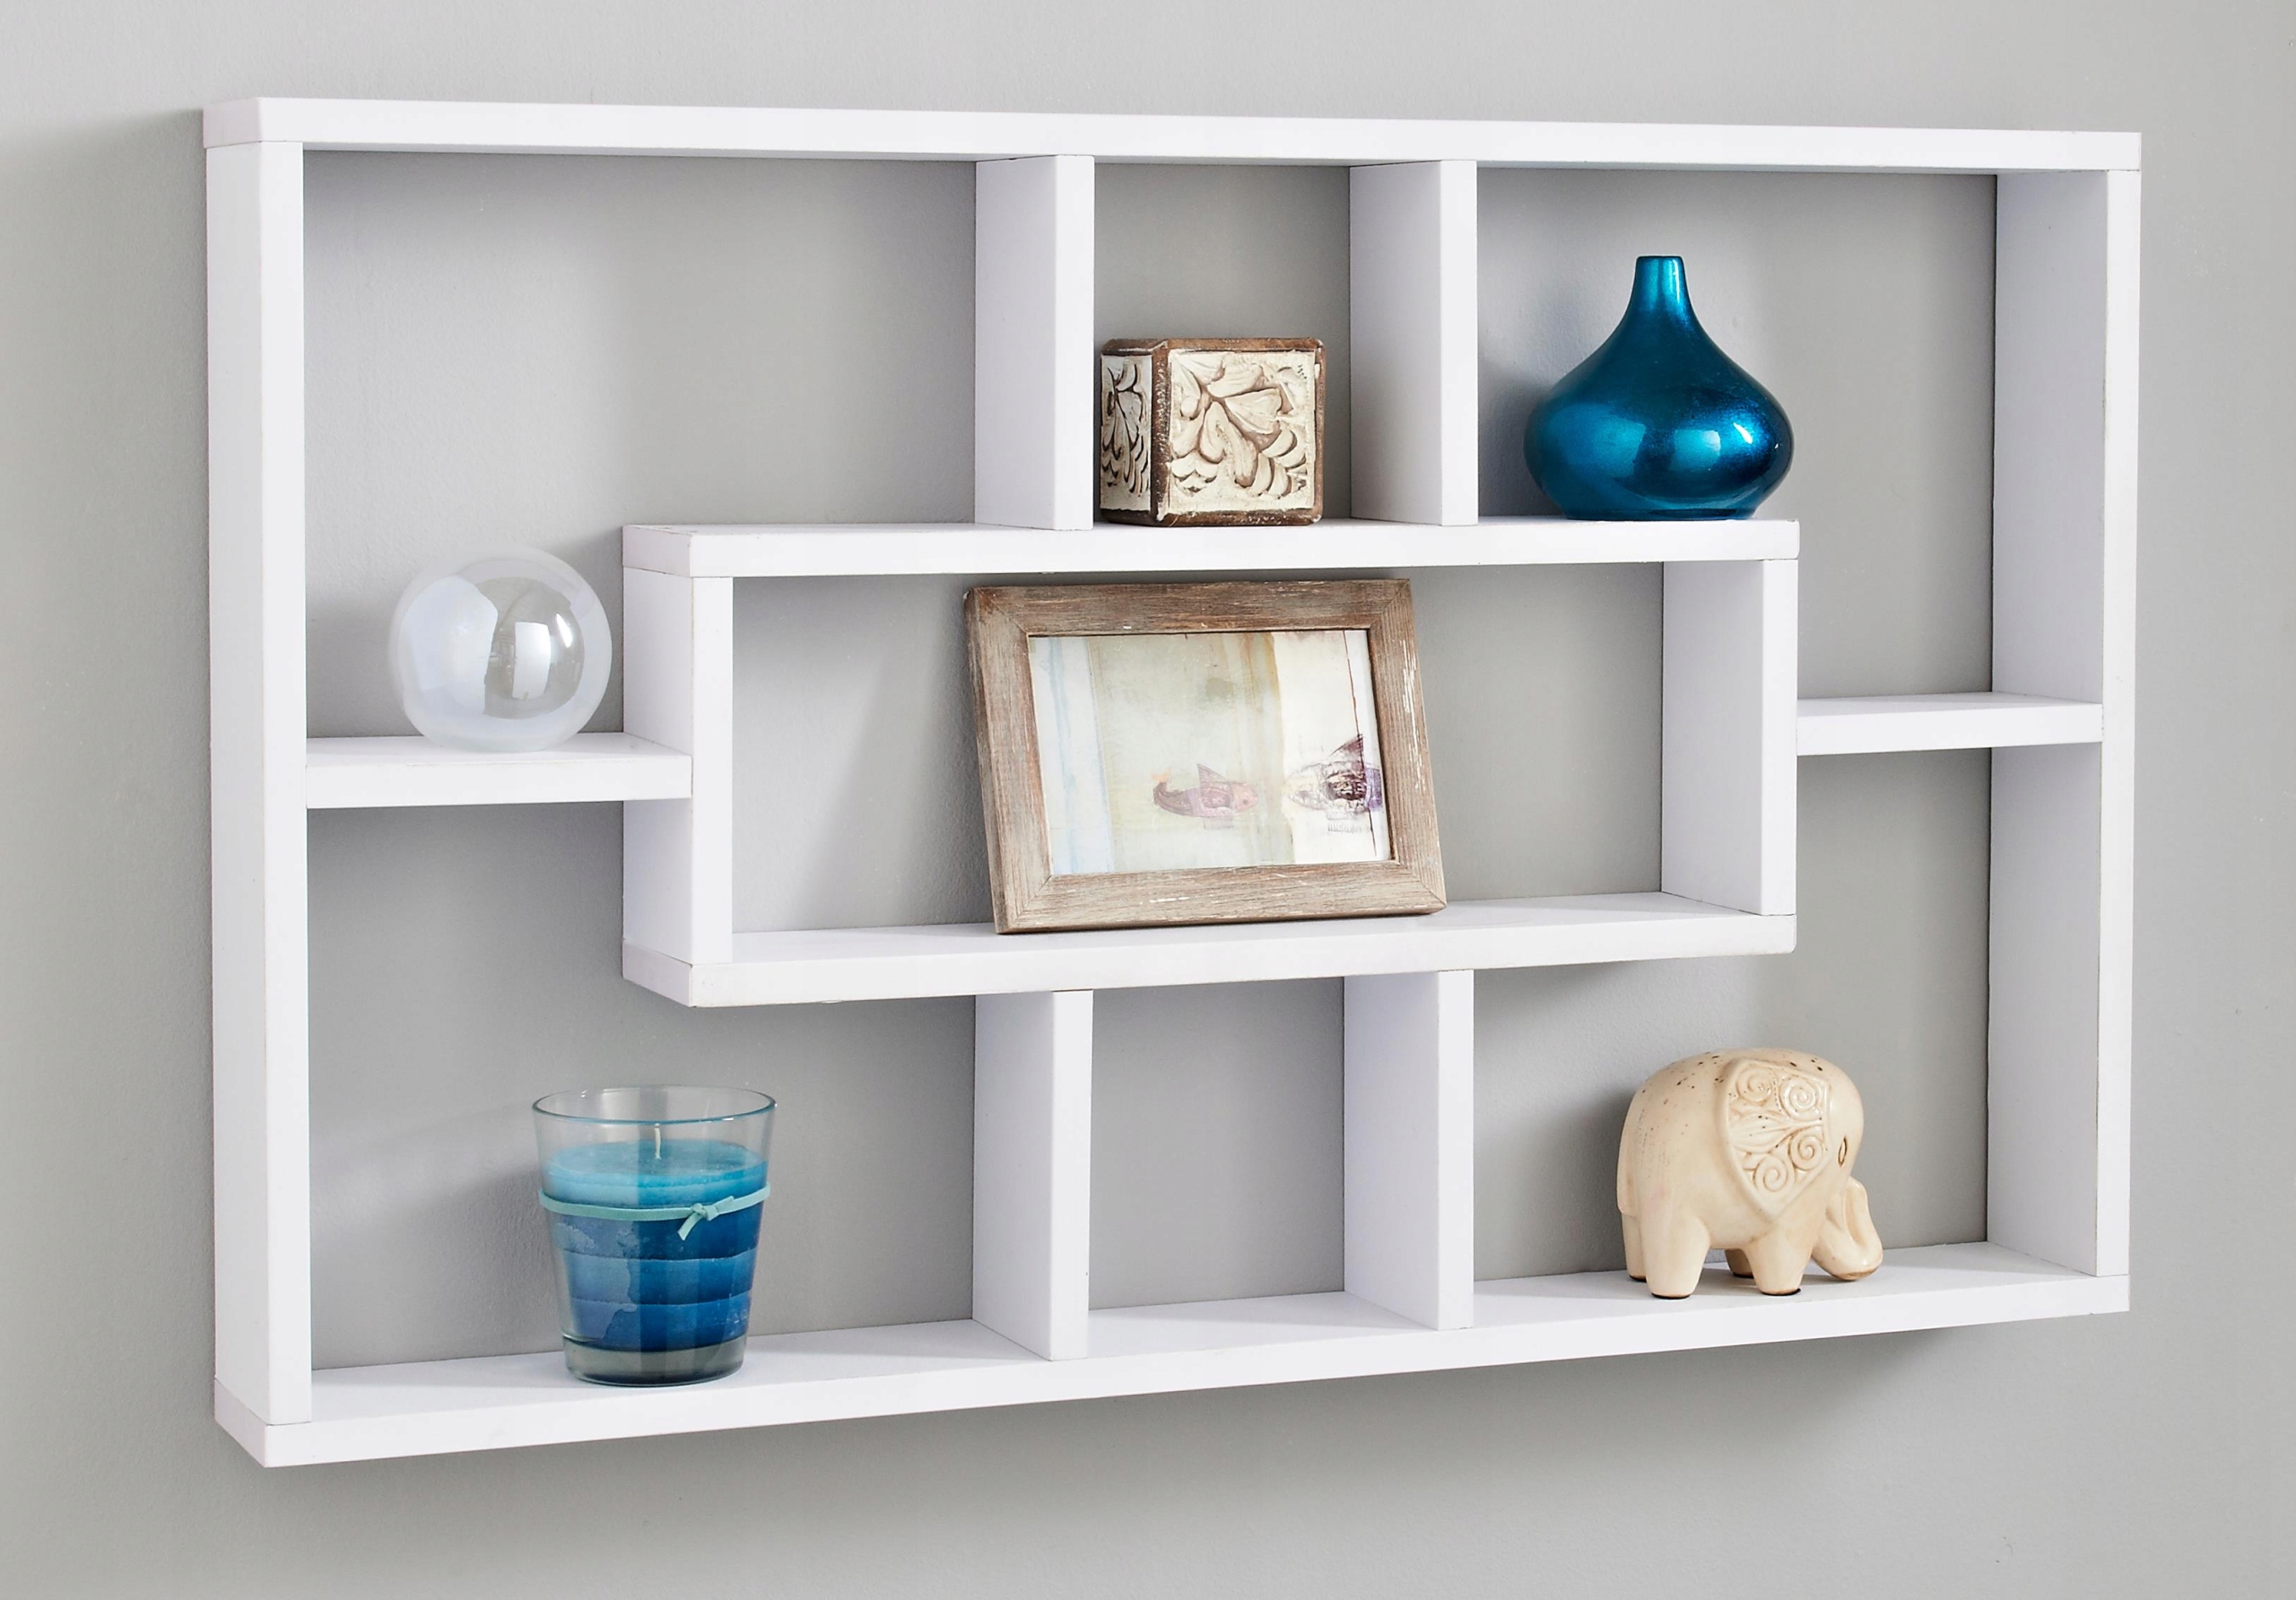 wall-mounted shelves for additional storage